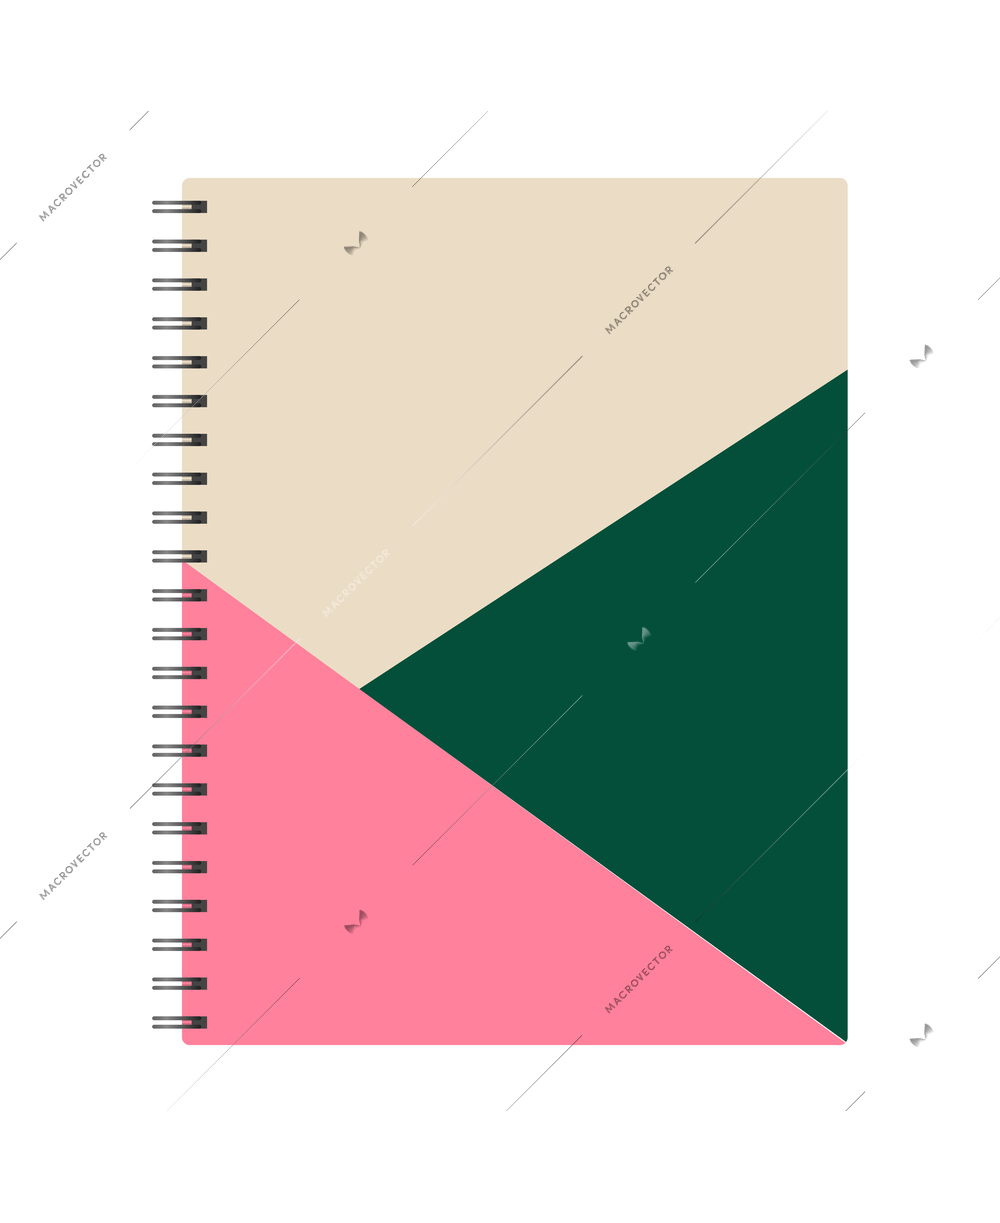 Realistic office items mockup top view composition with image of spiral notebook vector illustration